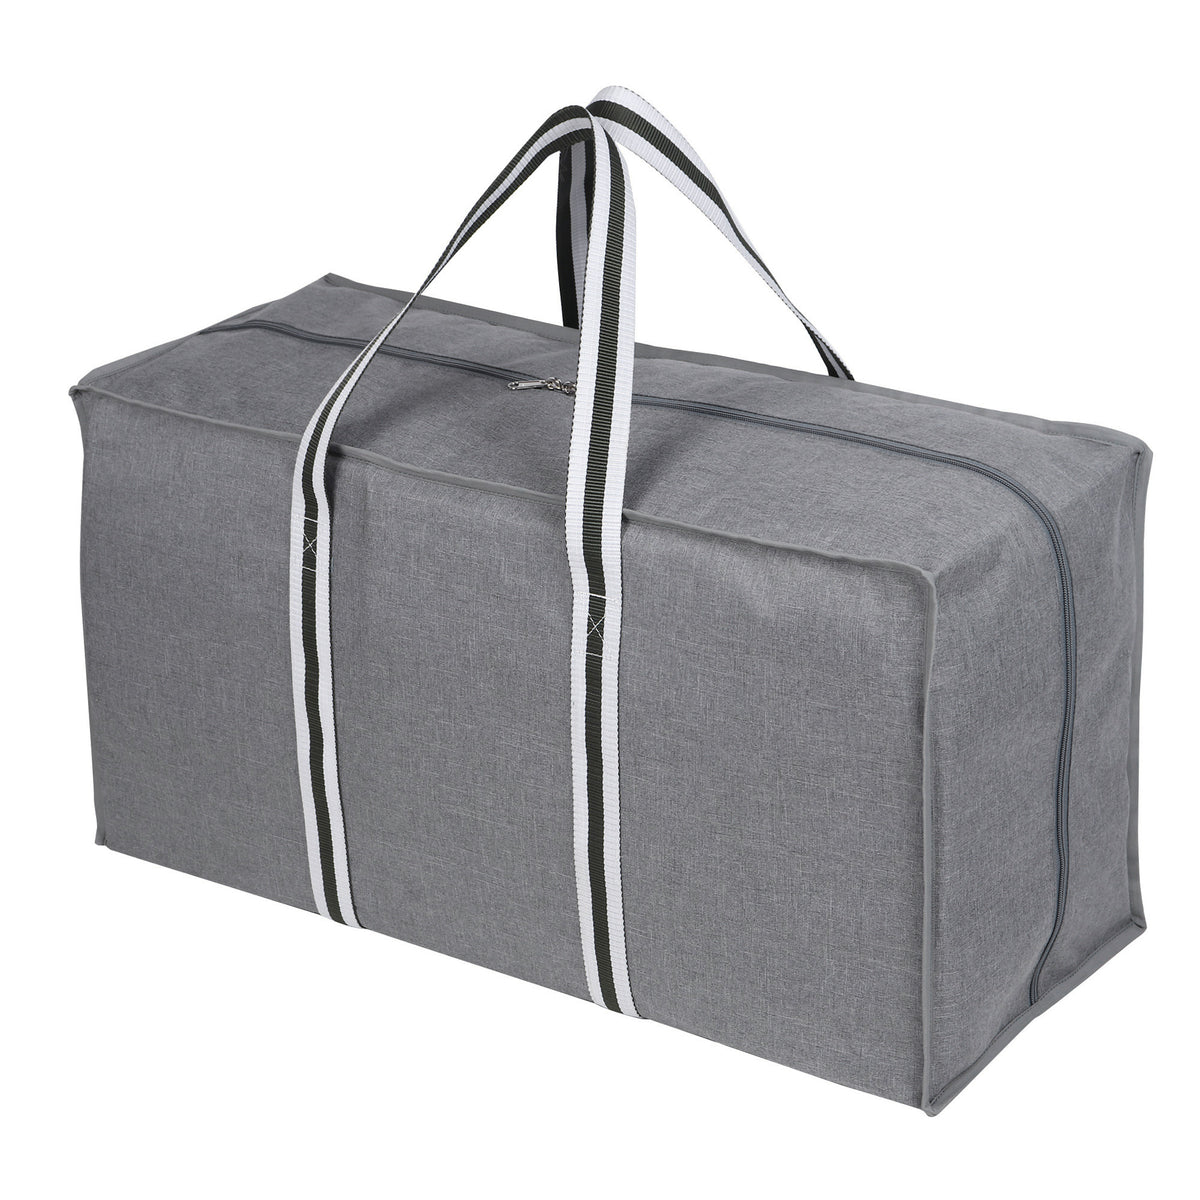 Buy Heavy Duty Extra Large Storage Bag Blanket Clothes Organizer Online-  Double R Bags